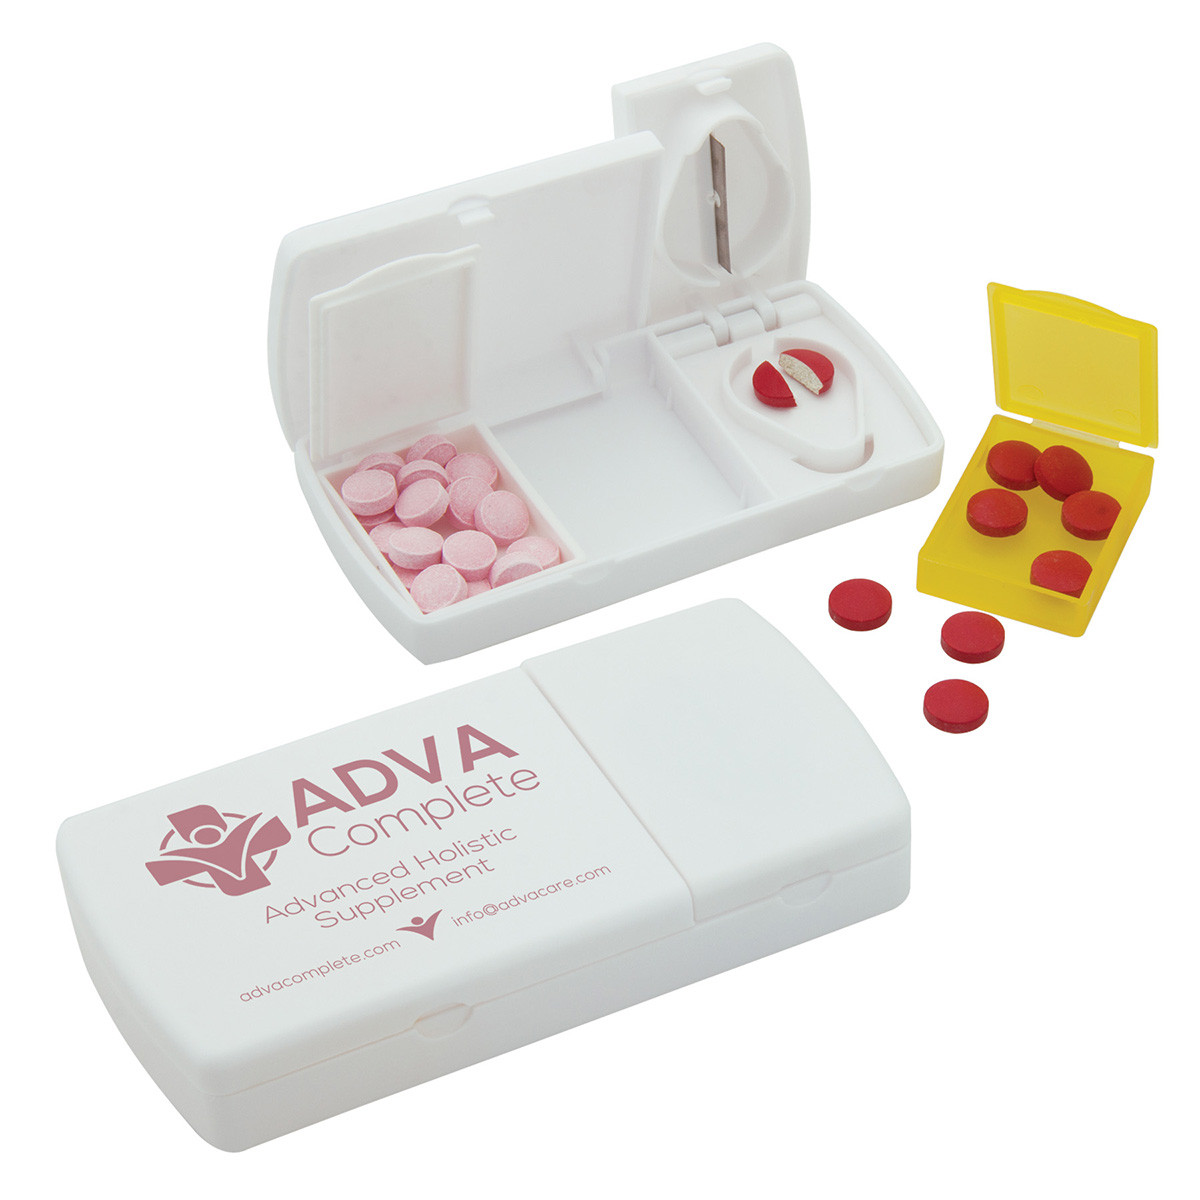 Pill Splitter Case with Removable Pillboxes